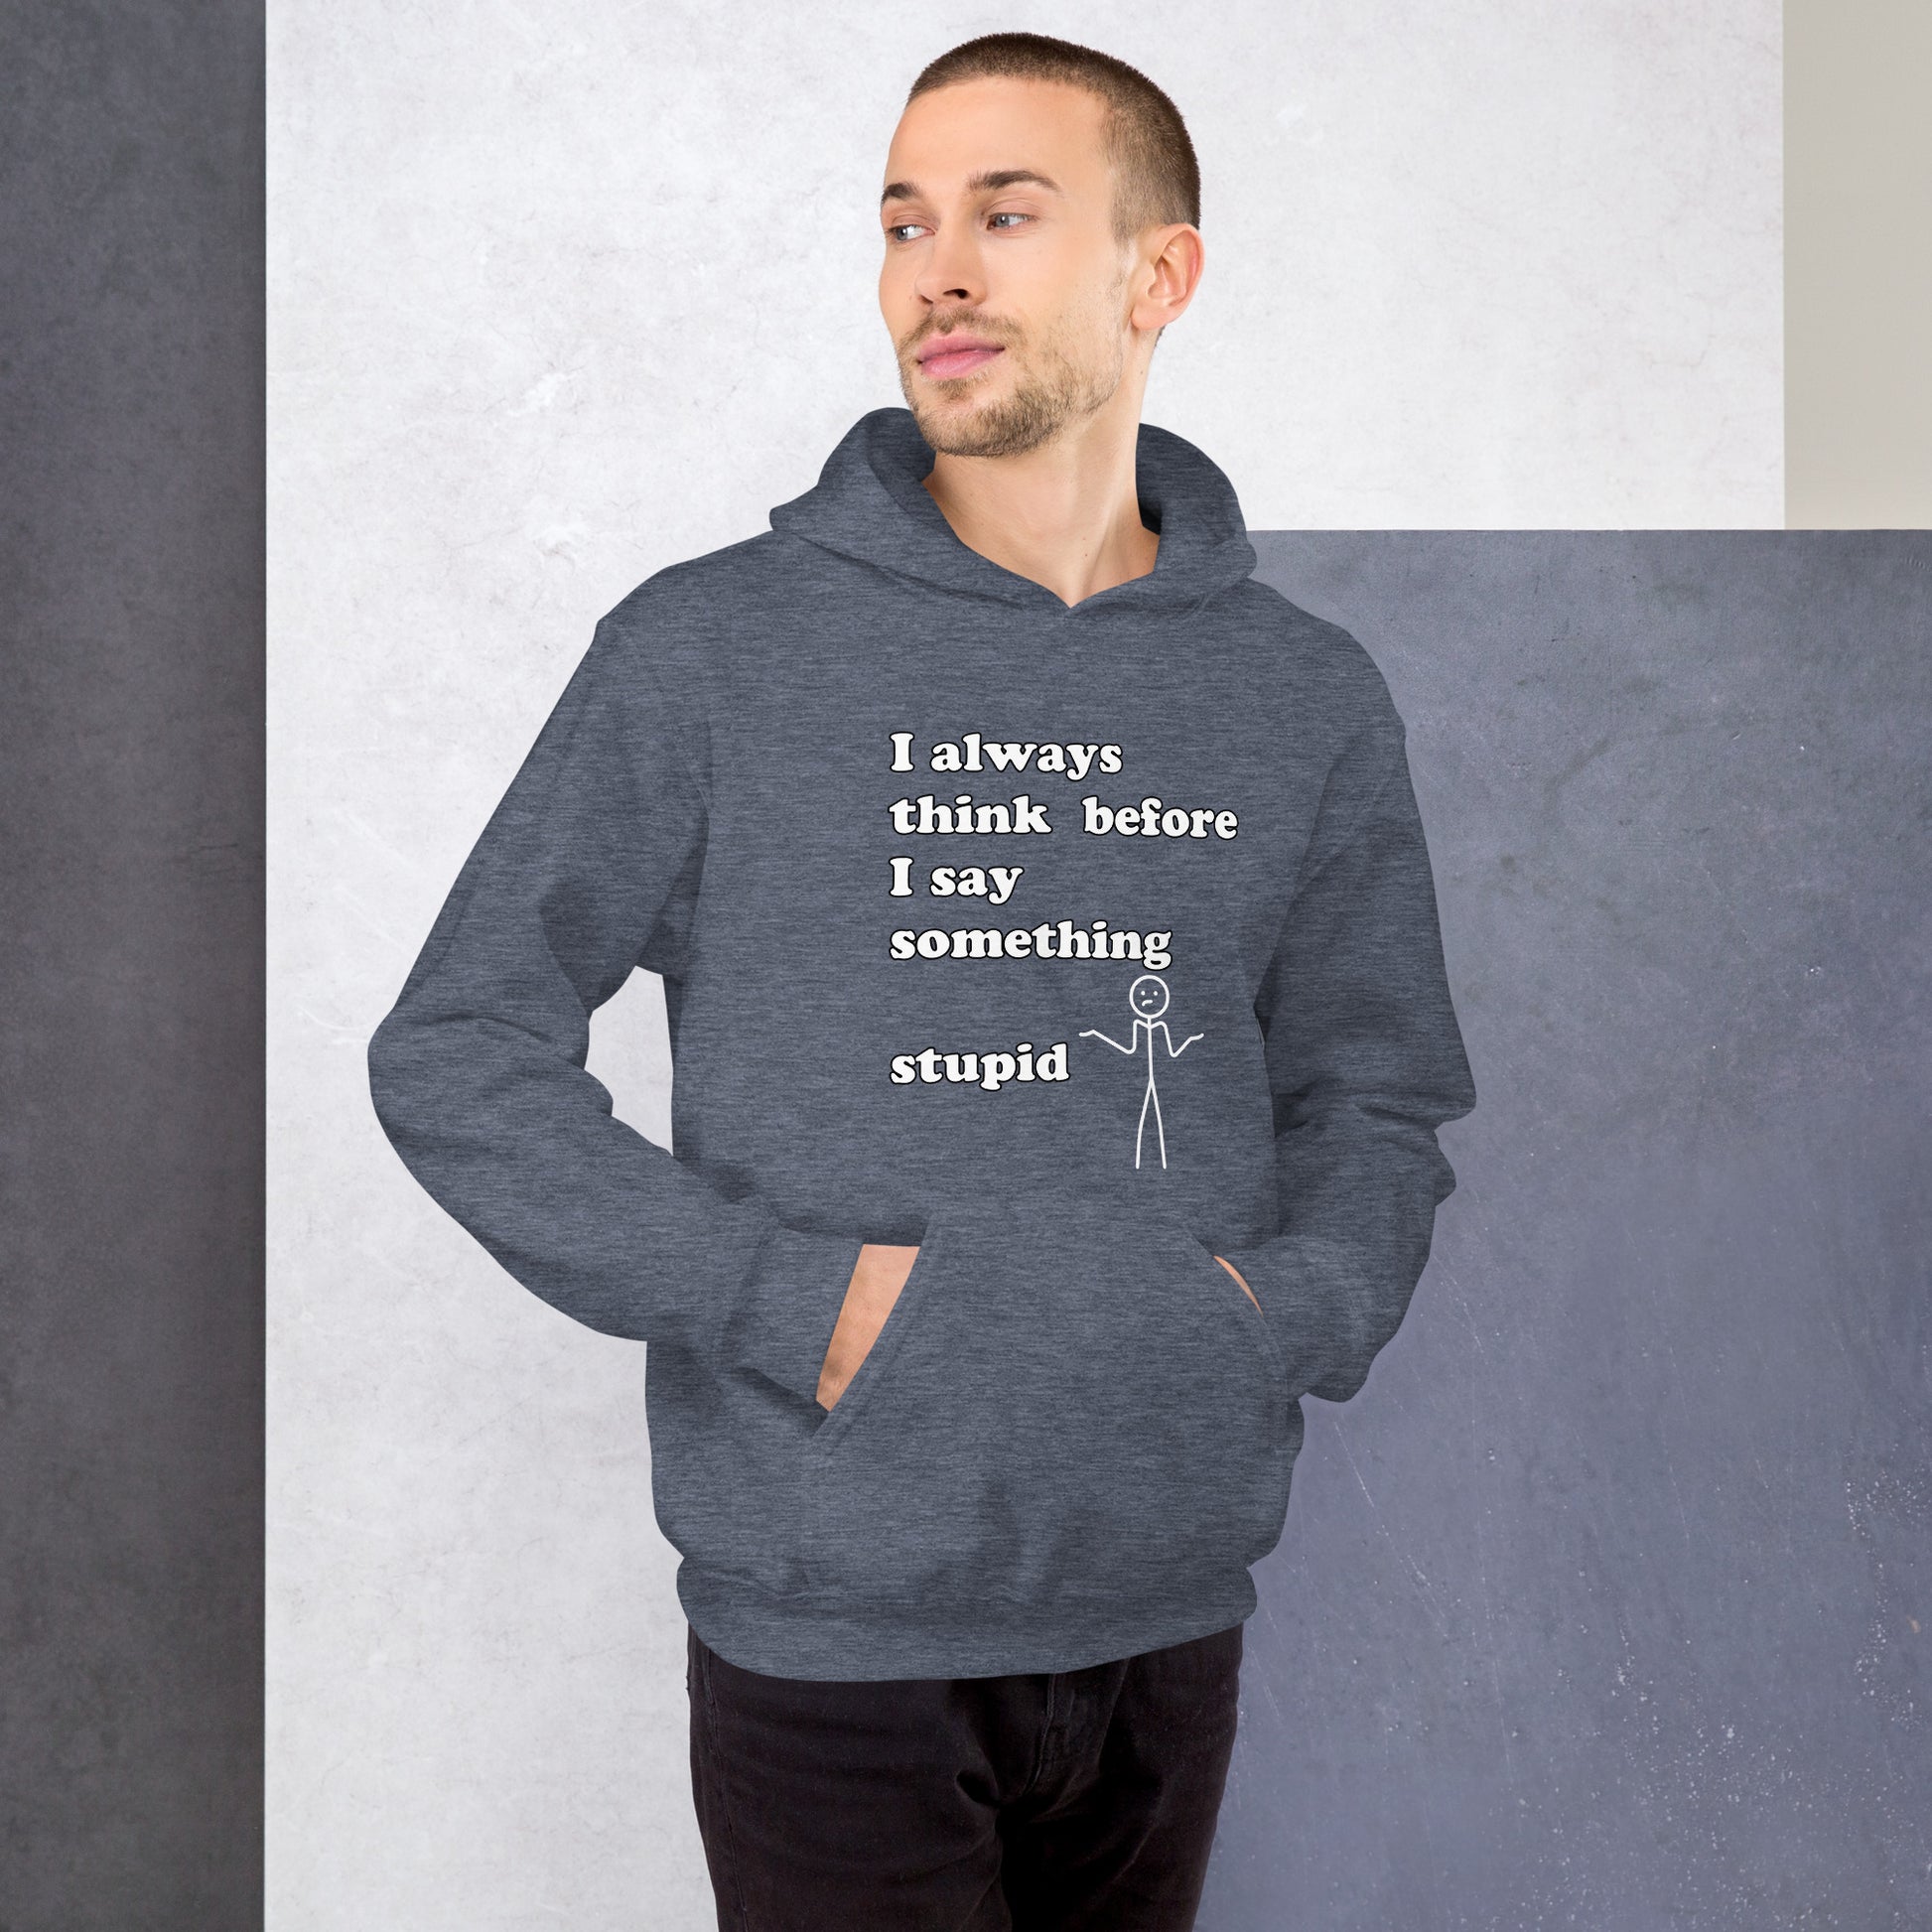 Man with dark navy blue hoodie with text "I always think before I say something stupid"